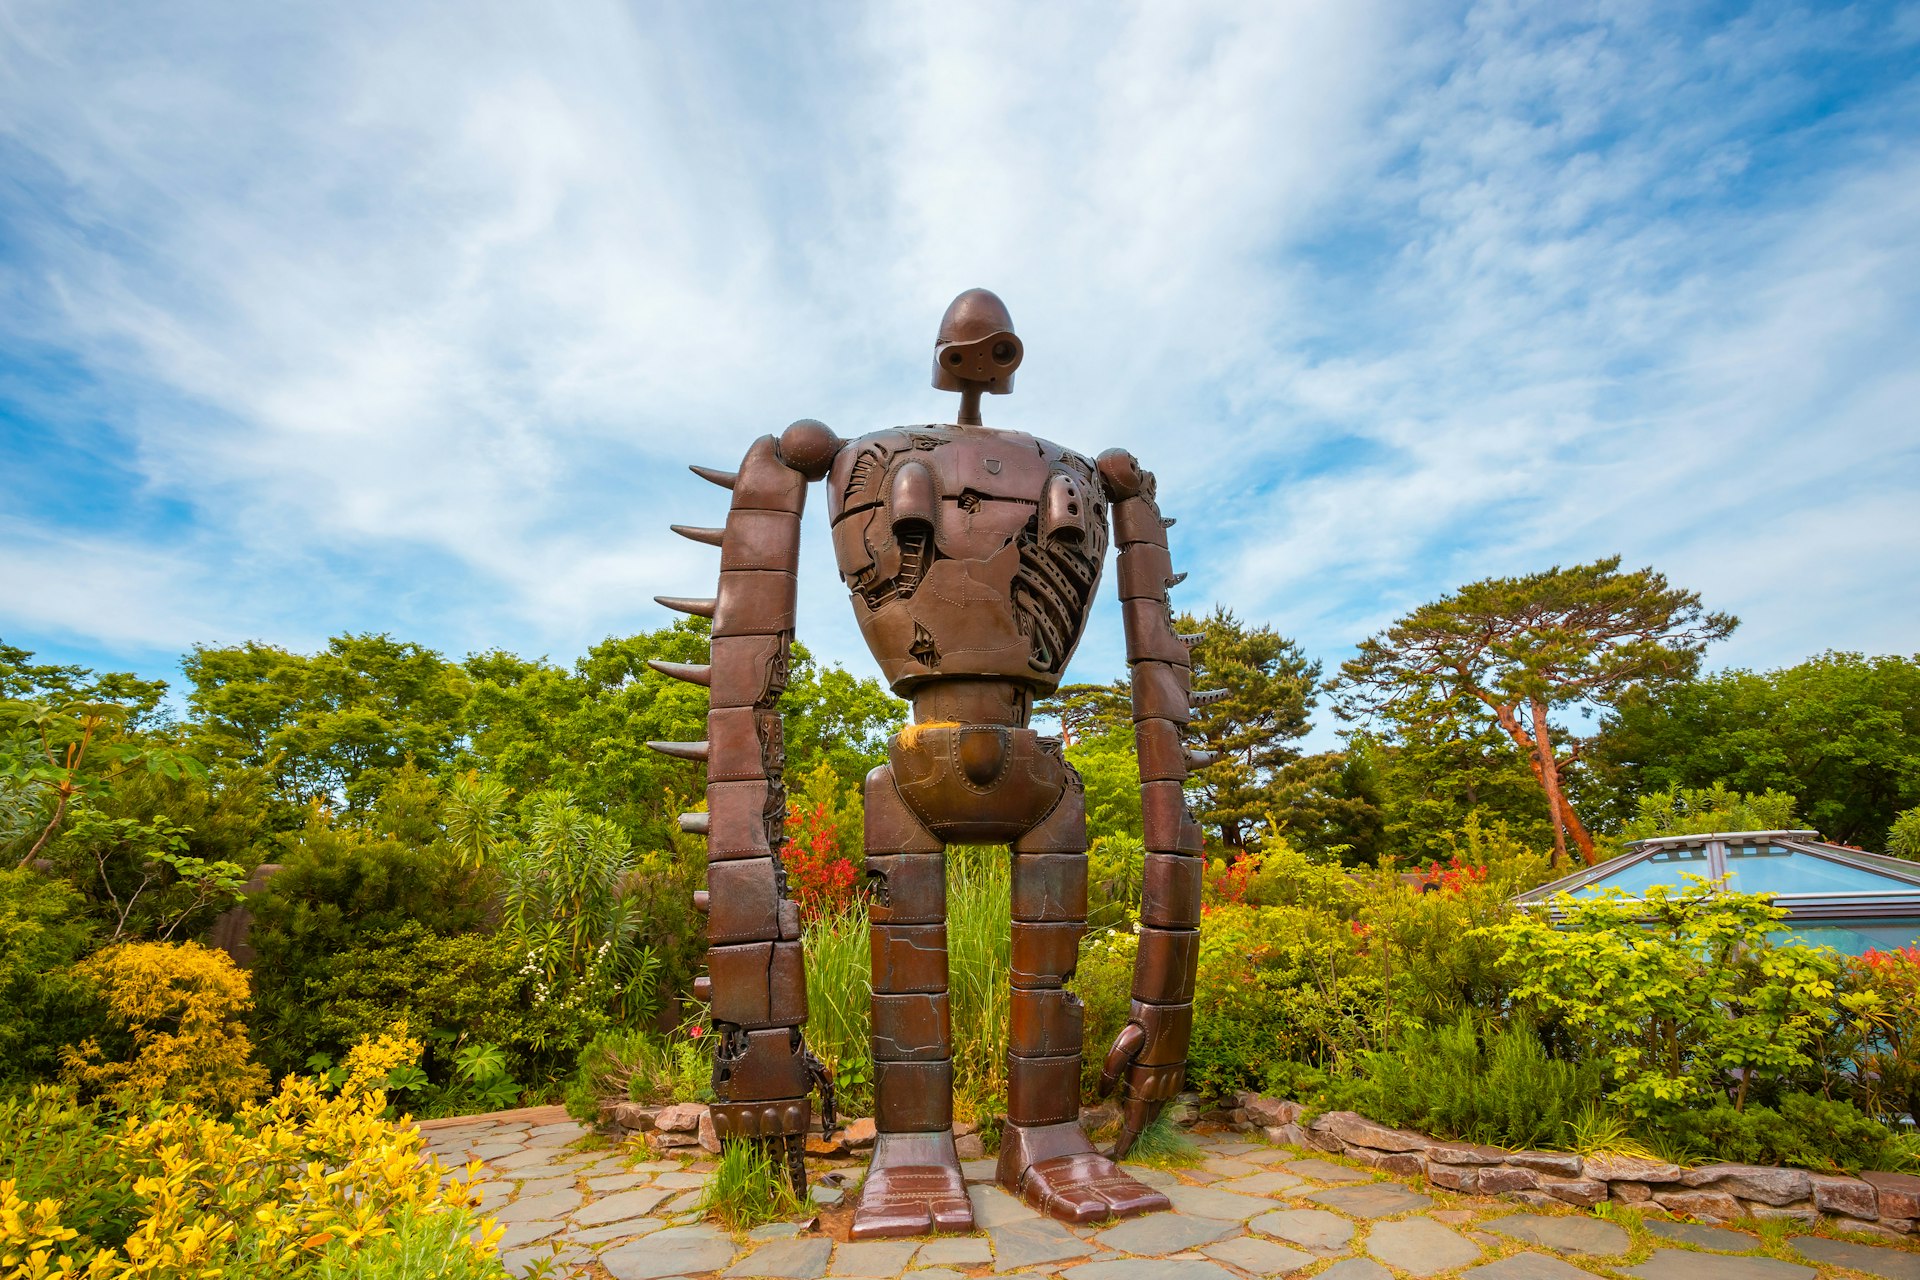 The Robot statue in an open garden space at the Ghibli museum